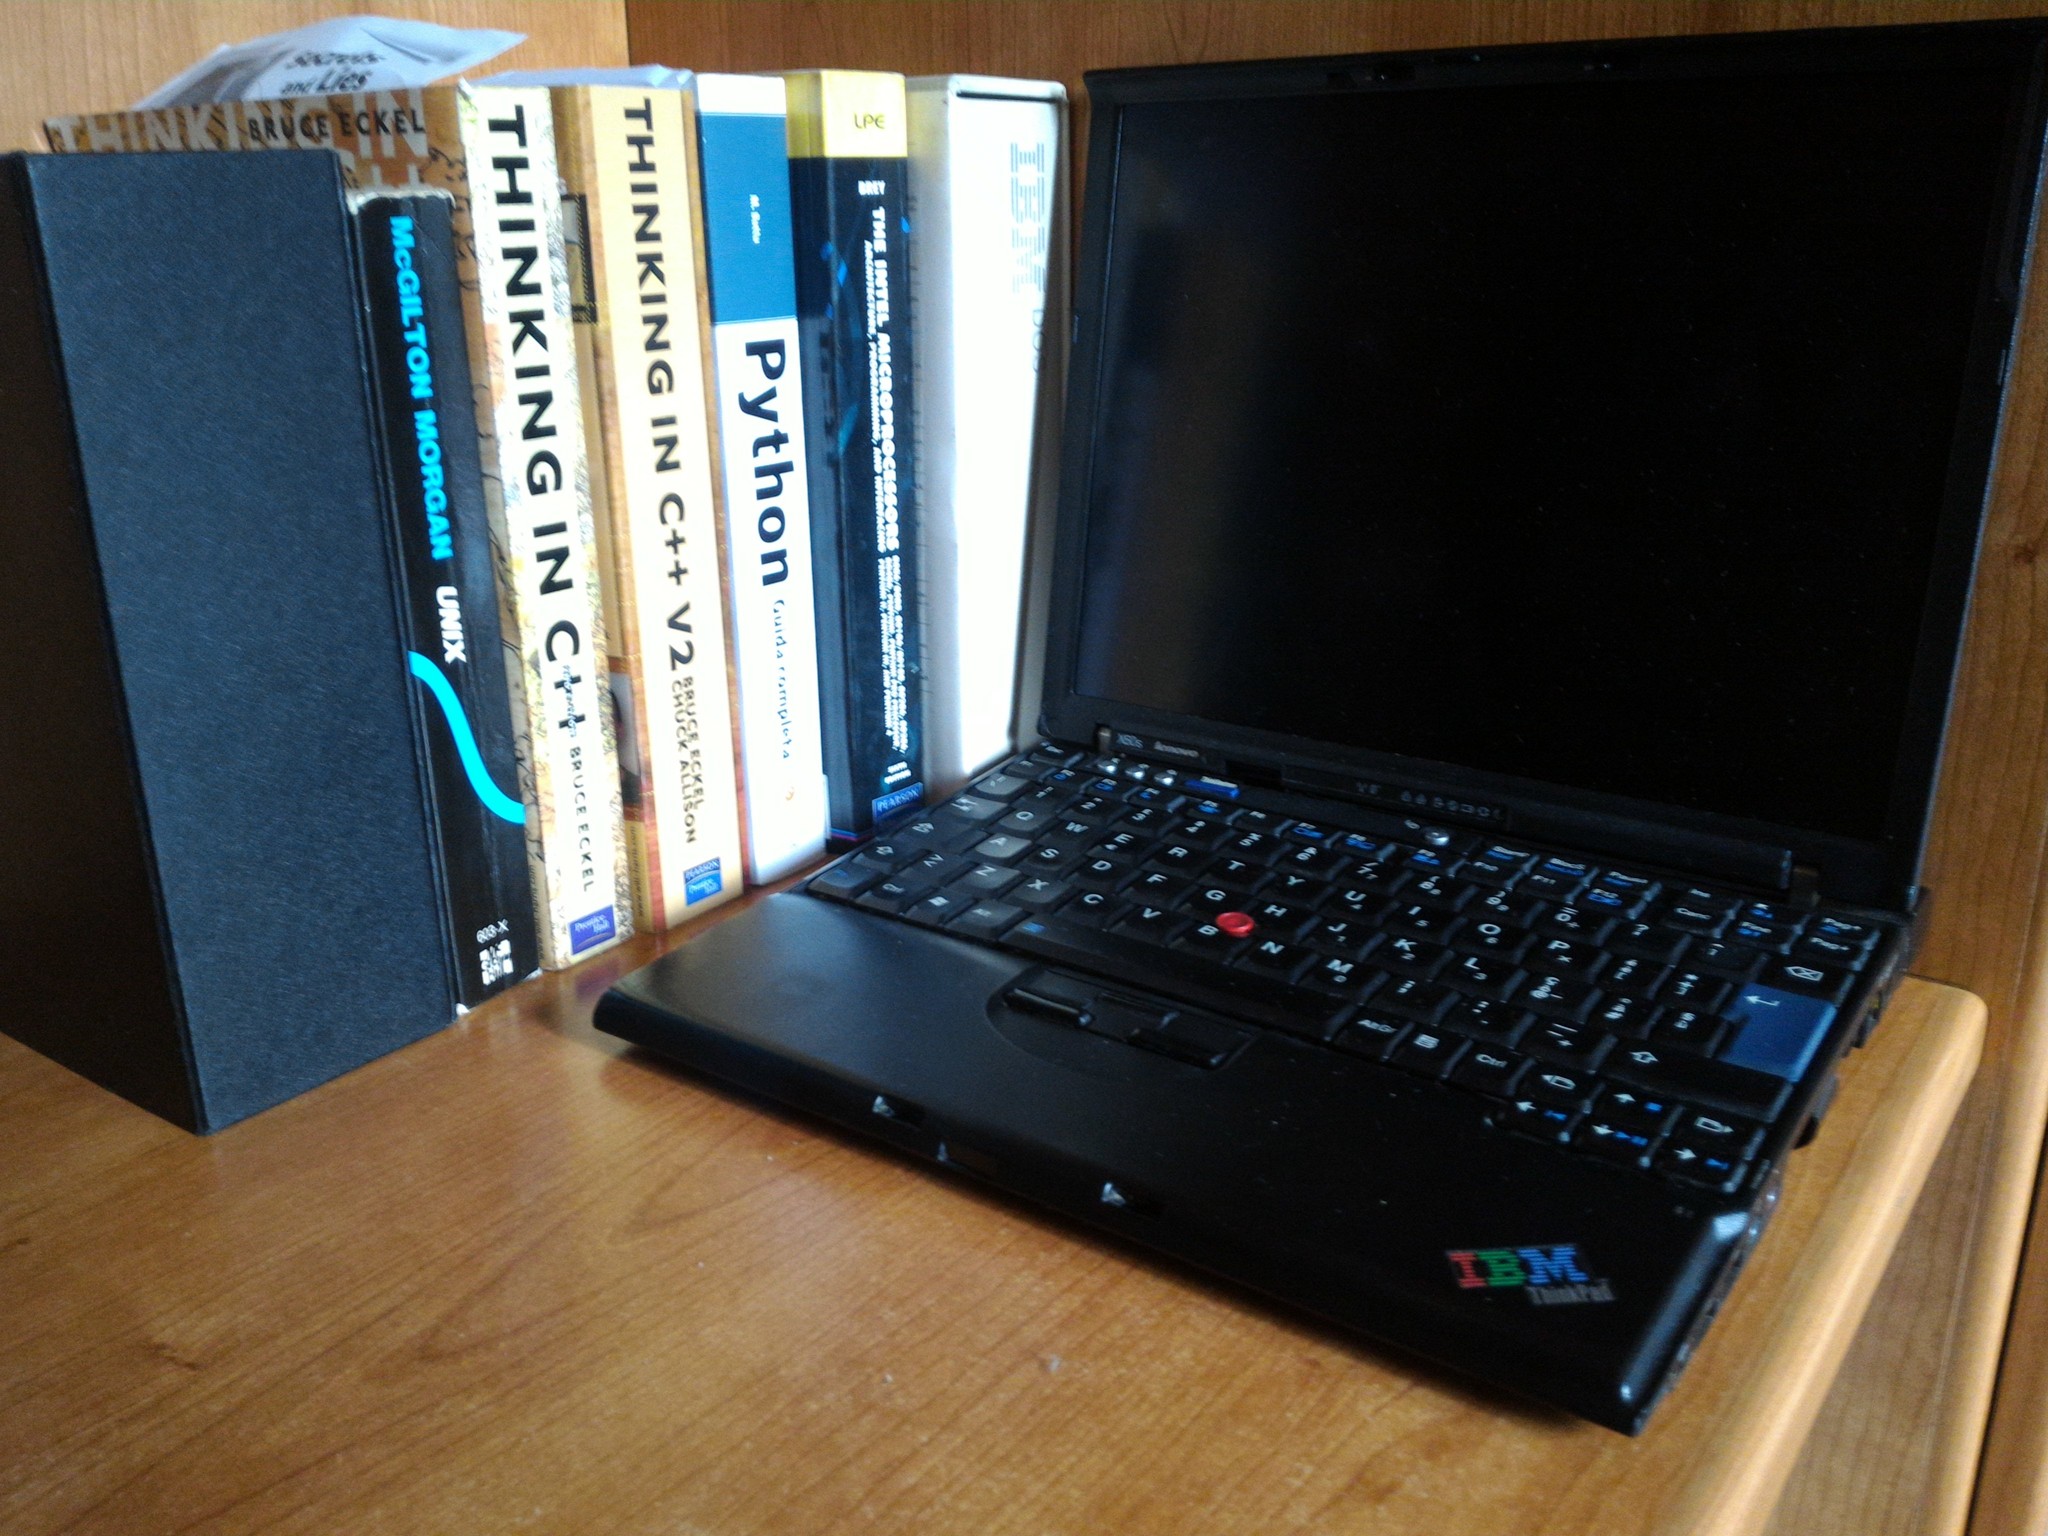 An image of the ThinkPad X60s